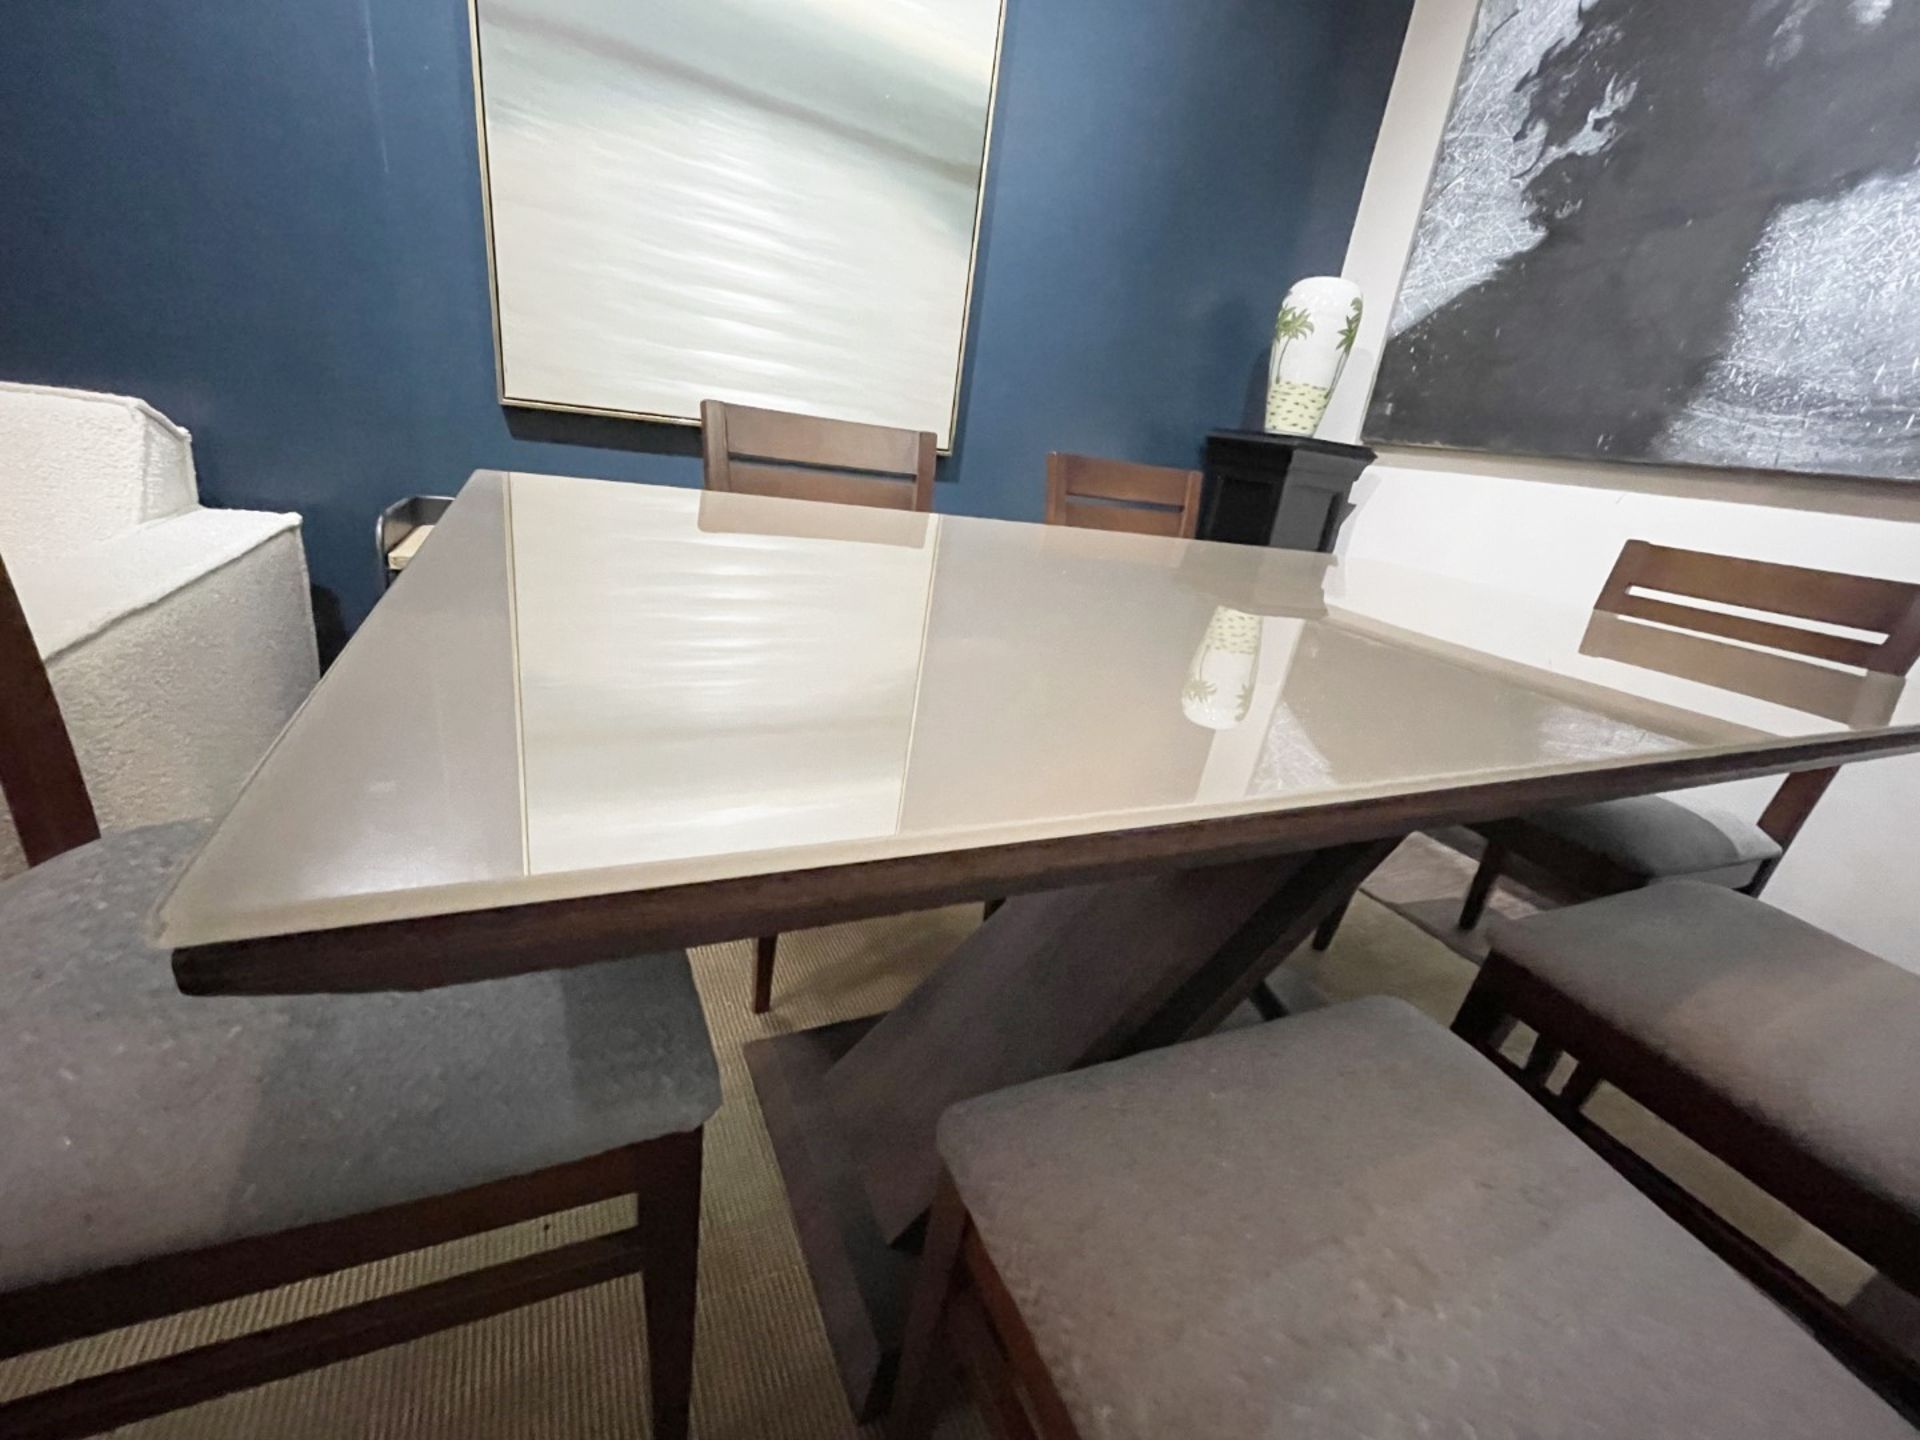 1 x VALUE MARK Rectangular Glass Topped Dining Table + 6 x Wooden Dining Chairs - Luxury Furniture - Image 5 of 23